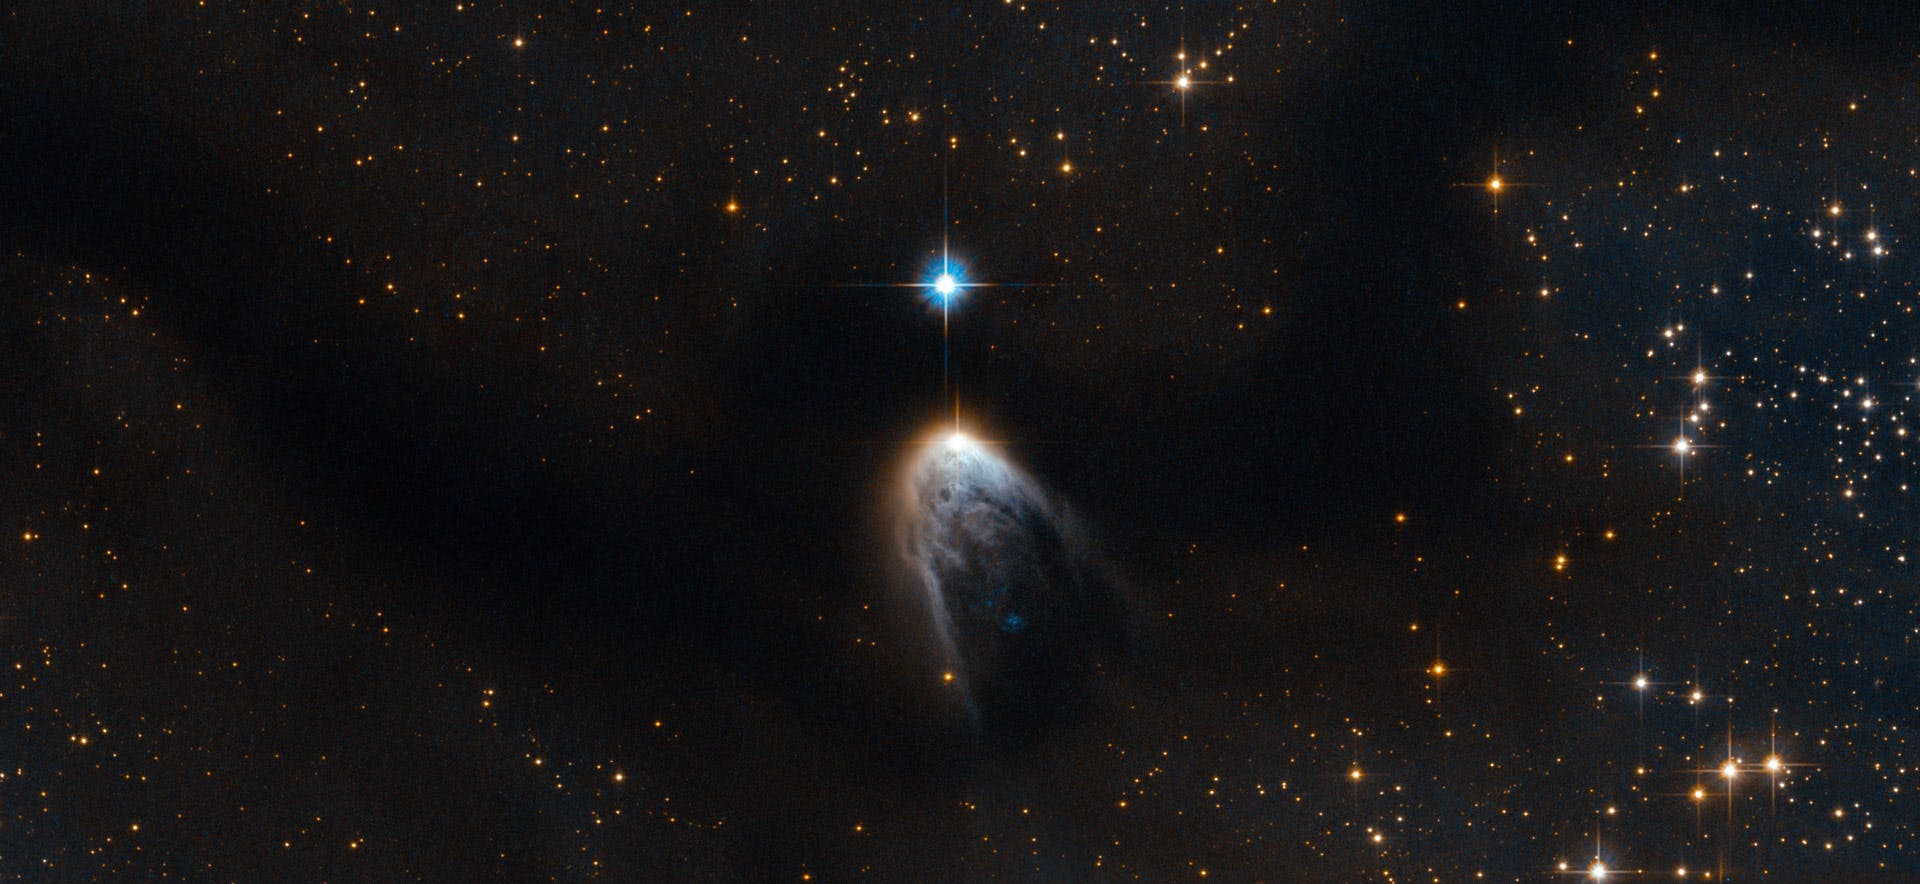 See A Baby Star Hatching From Its Birth Cloud